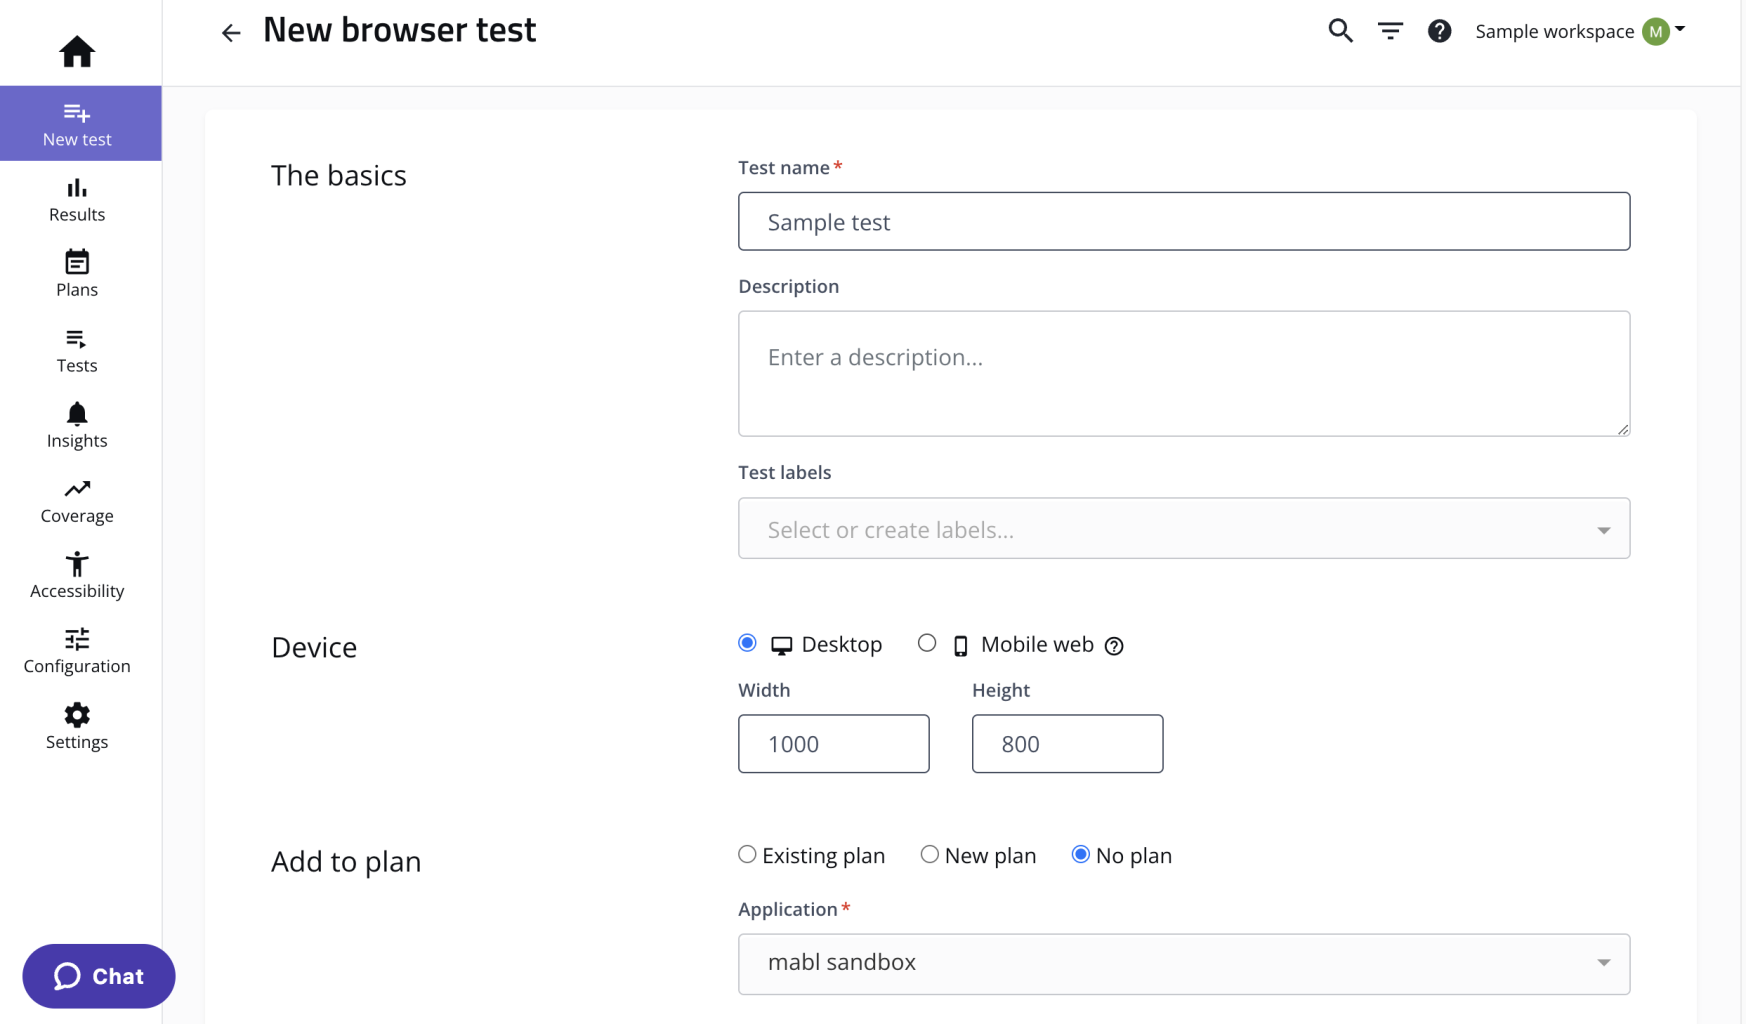 create browser test form